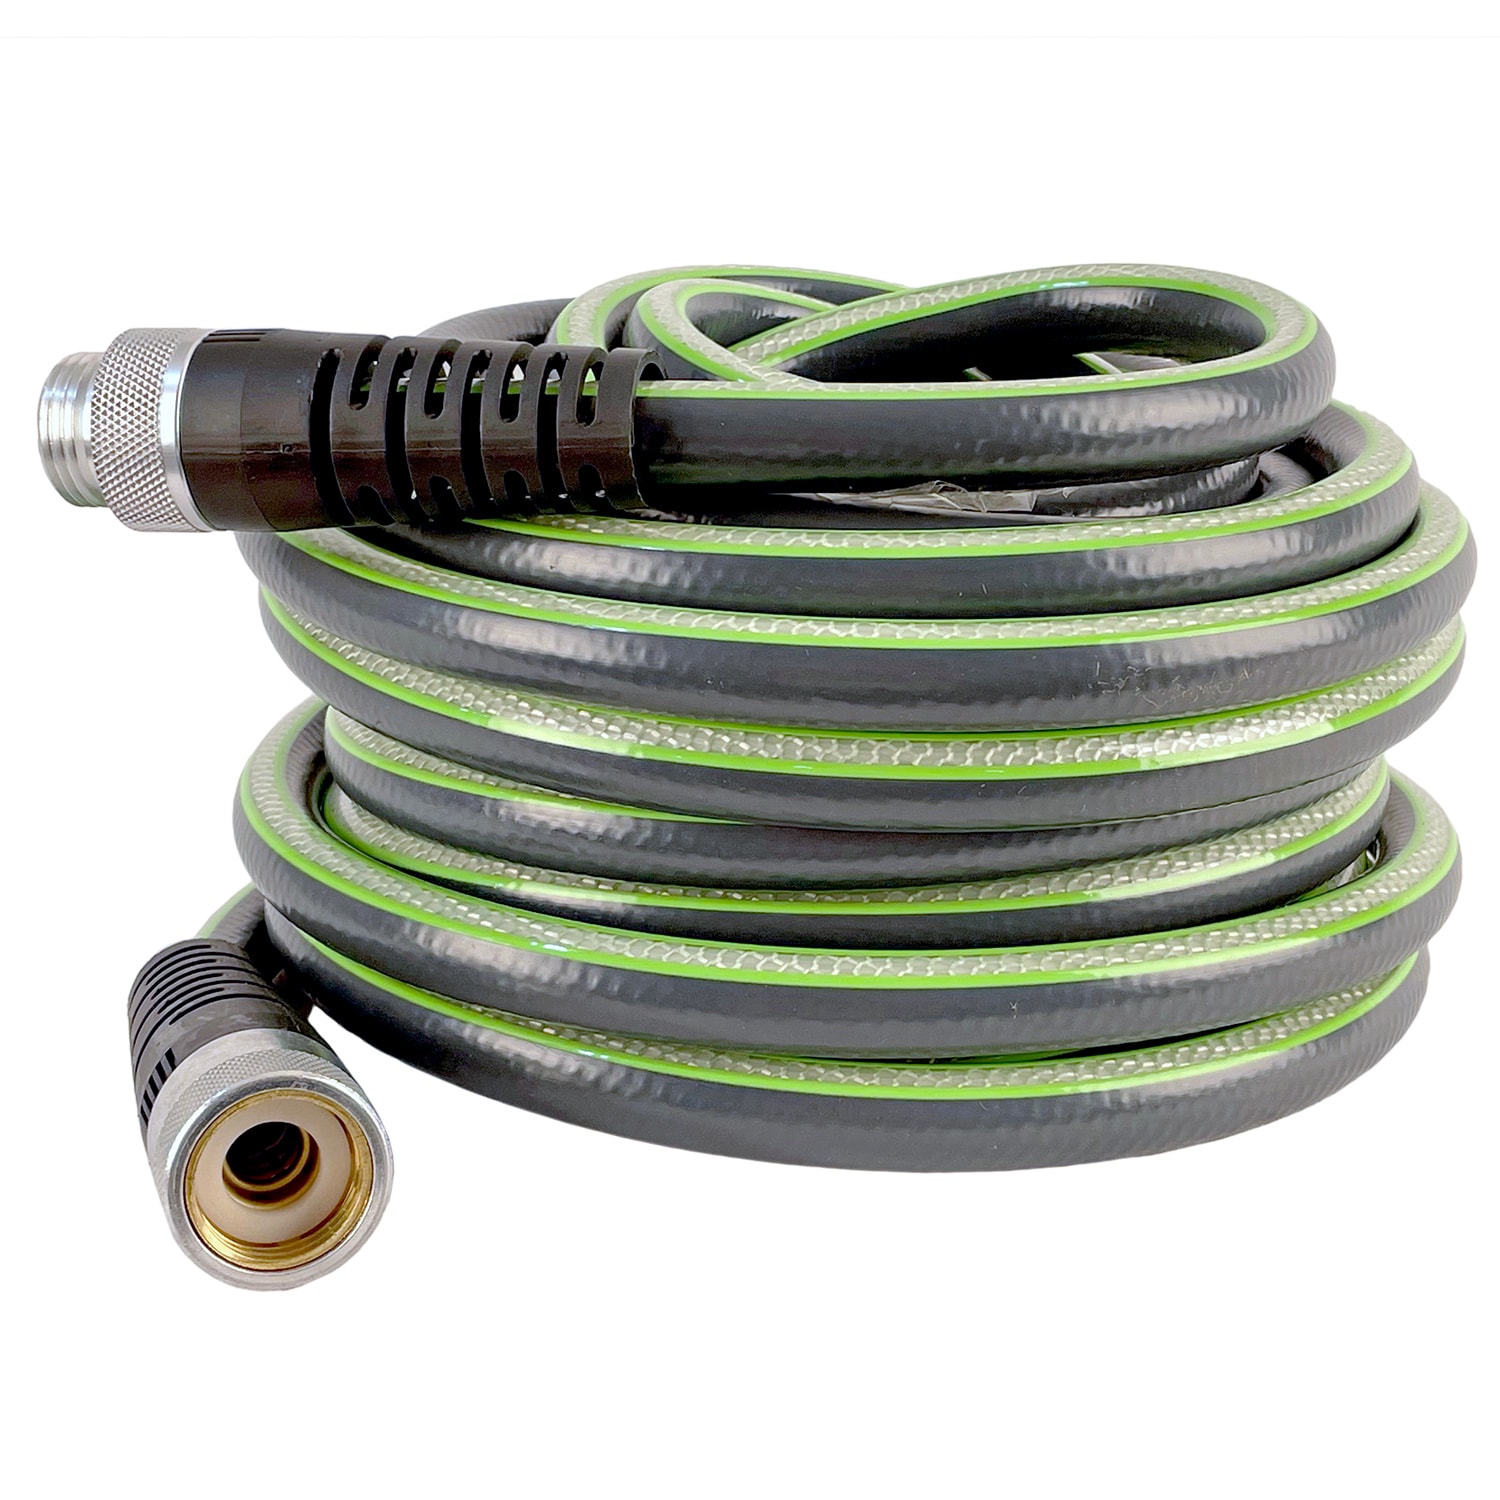 Icarscars 50FT Green/Black Water Hose for Car Wash,Garden Outdoor Wate –  icarscars - Your Preferred Auto Parts